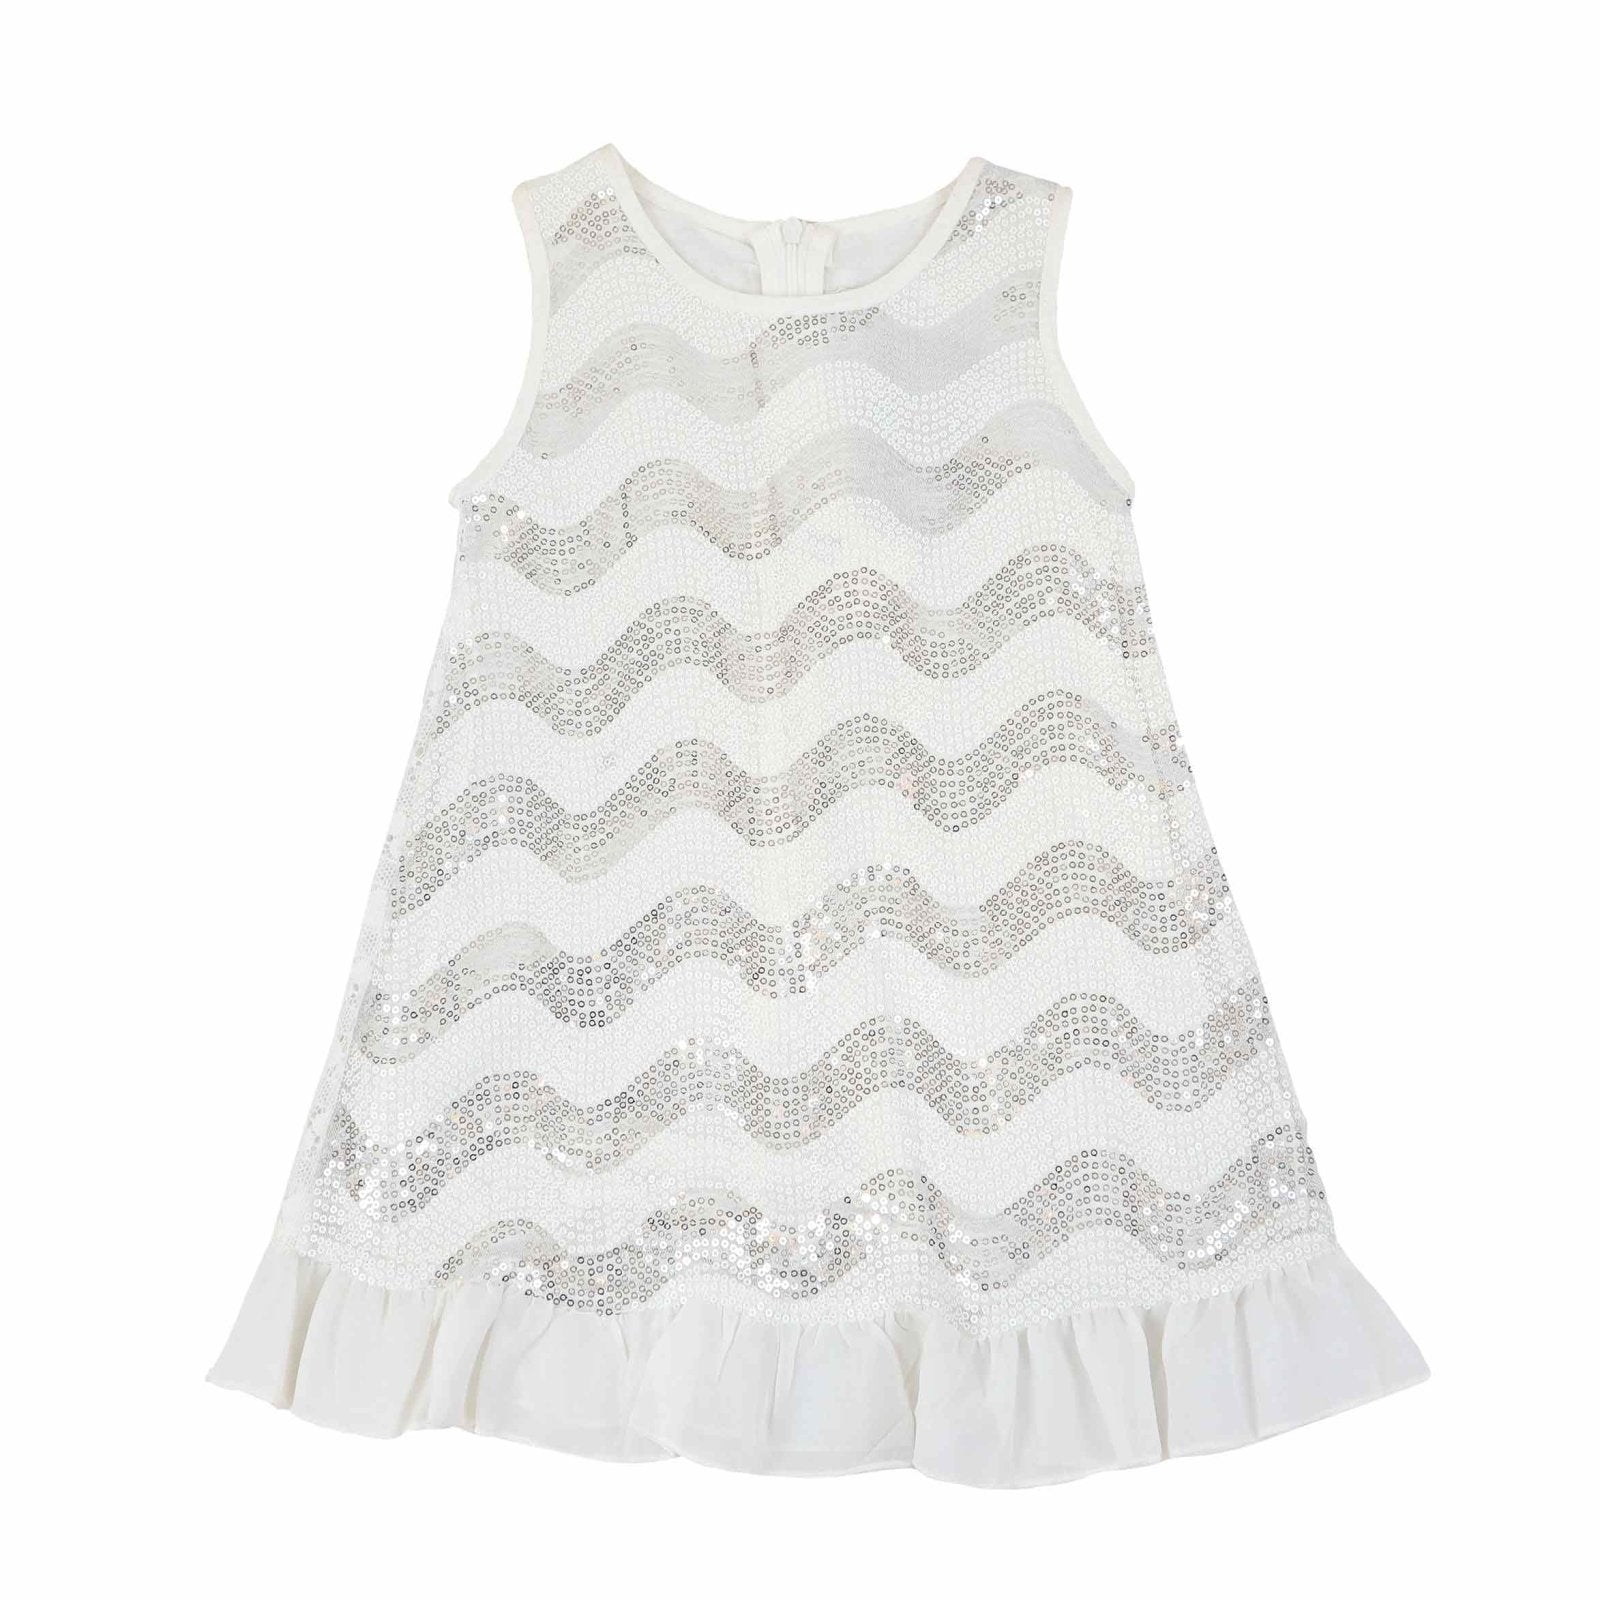 Baby Girl Frock by Colettee Kids